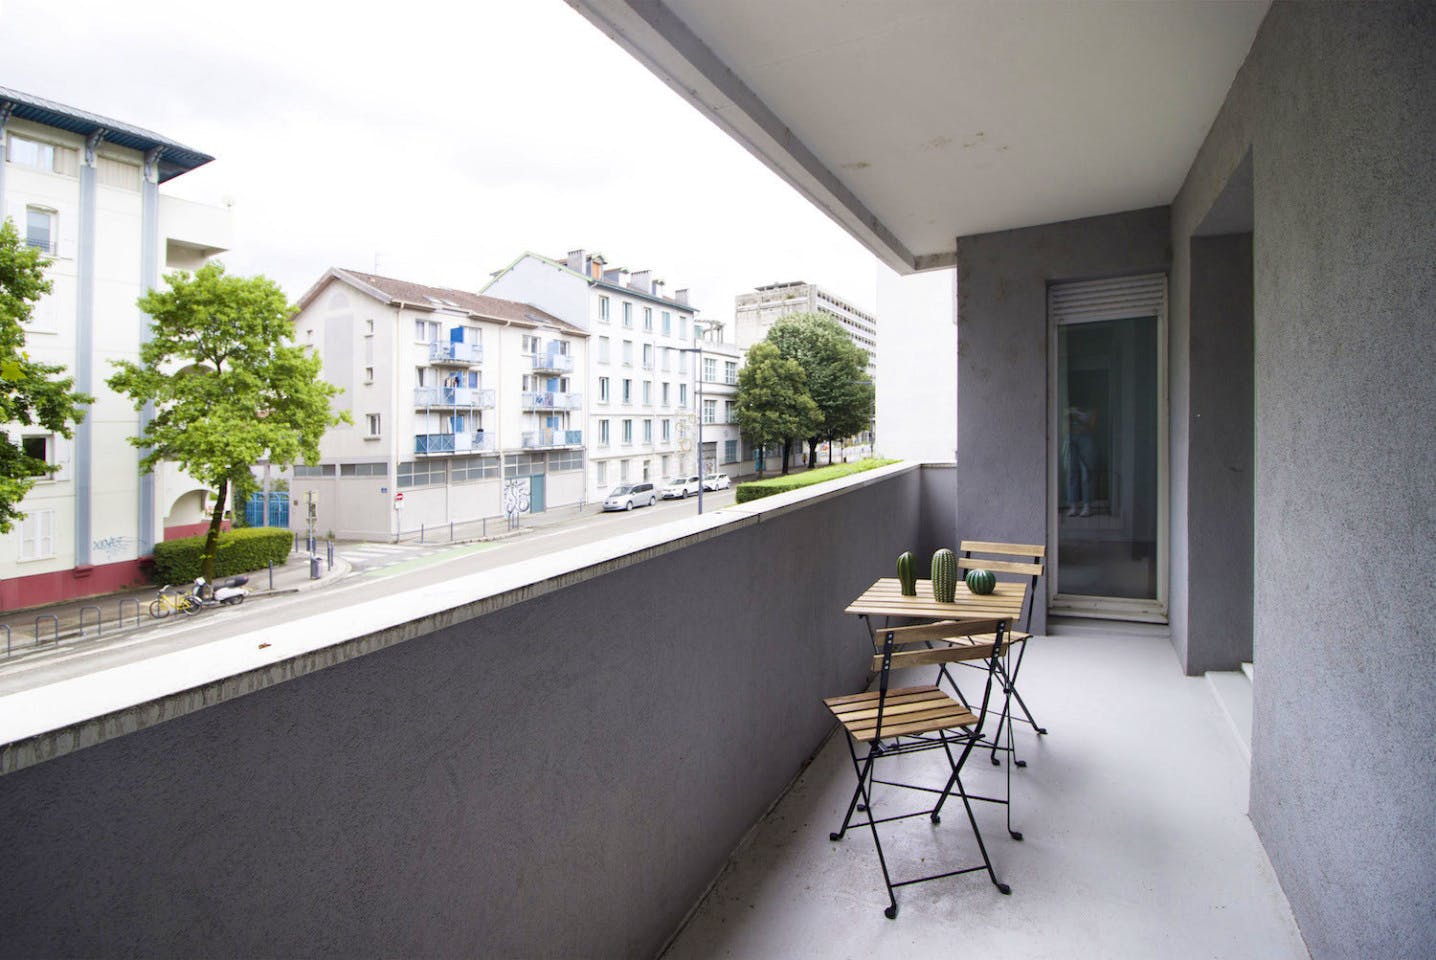 Spacious apartment with 5 bedrooms in the center of Grenoble